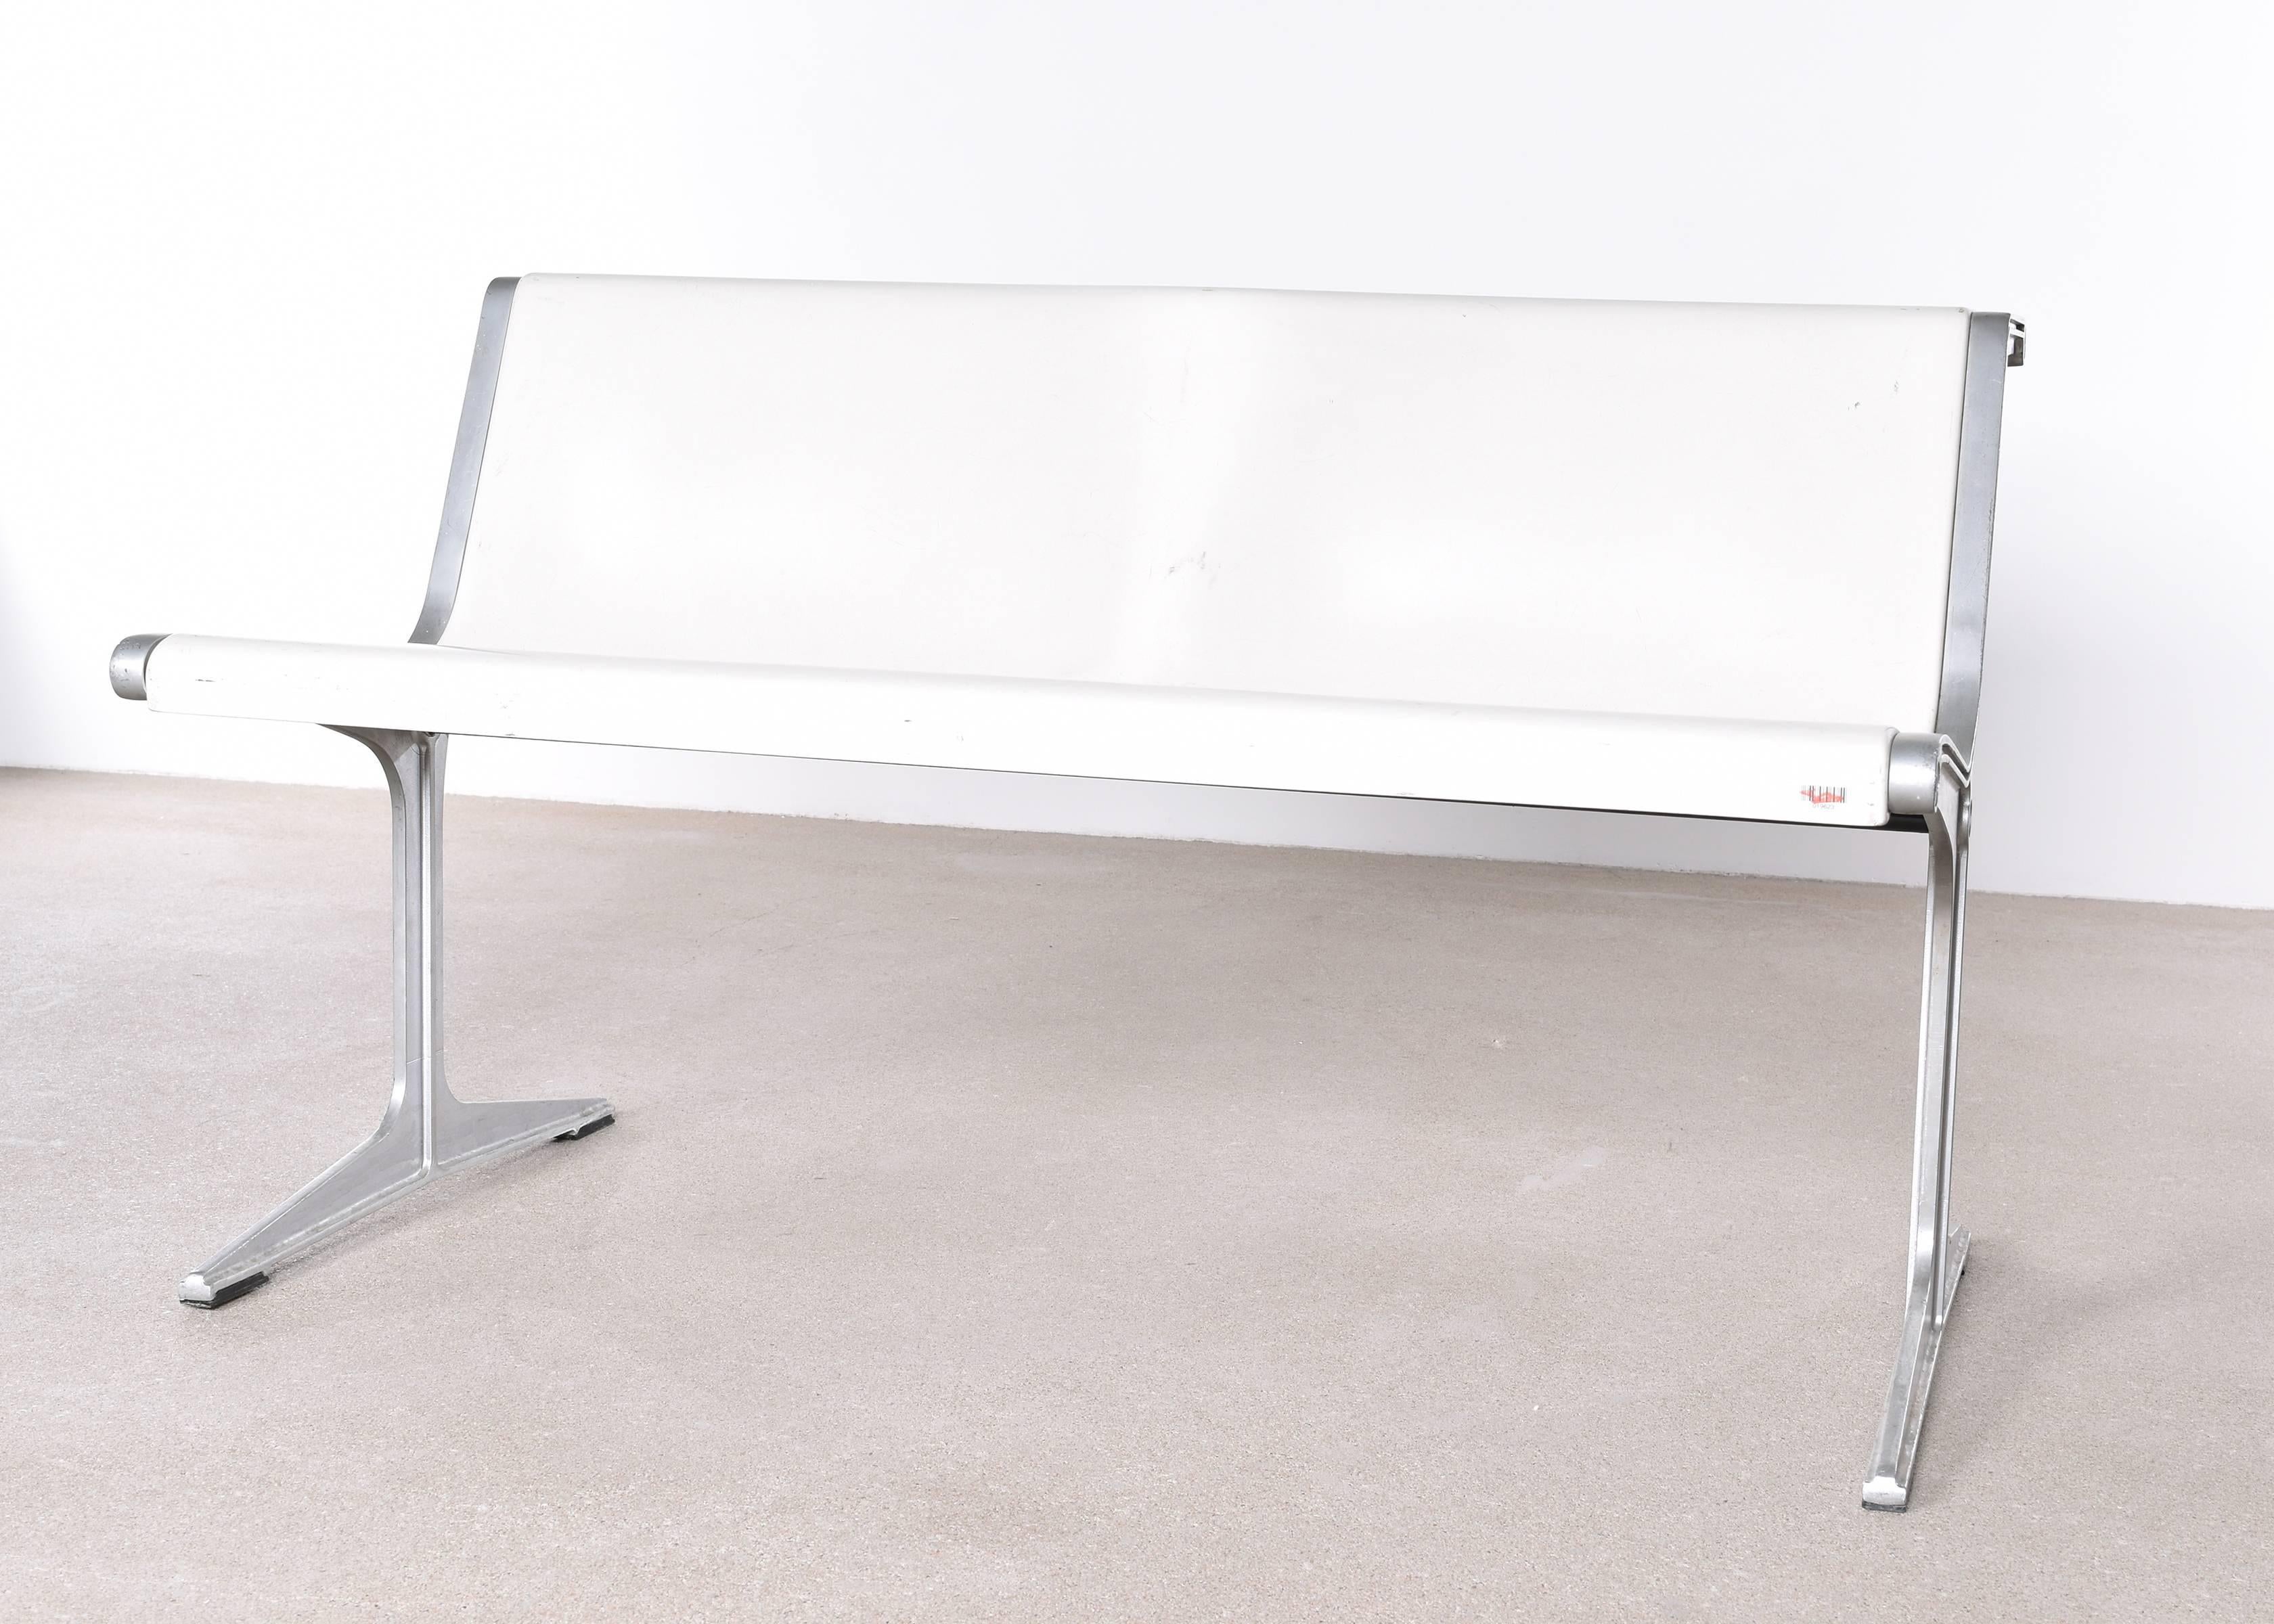 Rare Friso Kramer Bench 1200 series two-seat. Produced by Wilkhahn Germany and well known due usage in public spaces at the Olympic Games Munich 1972.
Aluminum frame is linkable and the seats are made of white fiberglass. The seating position is